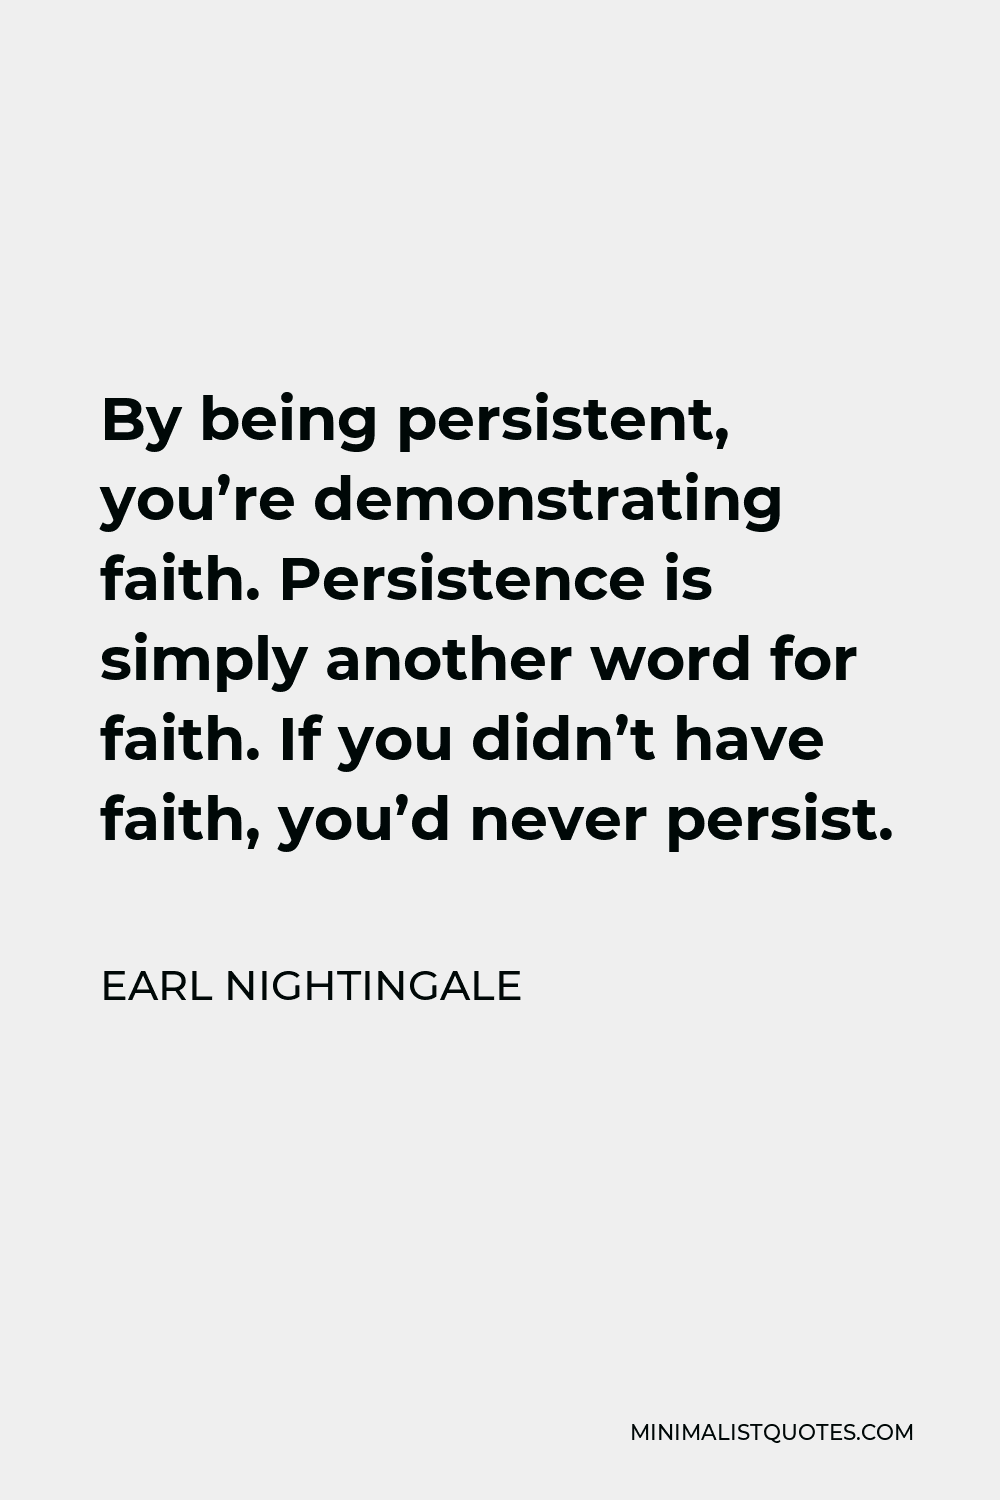 Earl Nightingale Quote - By being persistent, you’re demonstrating faith. Persistence is simply another word for faith. If you didn’t have faith, you’d never persist.